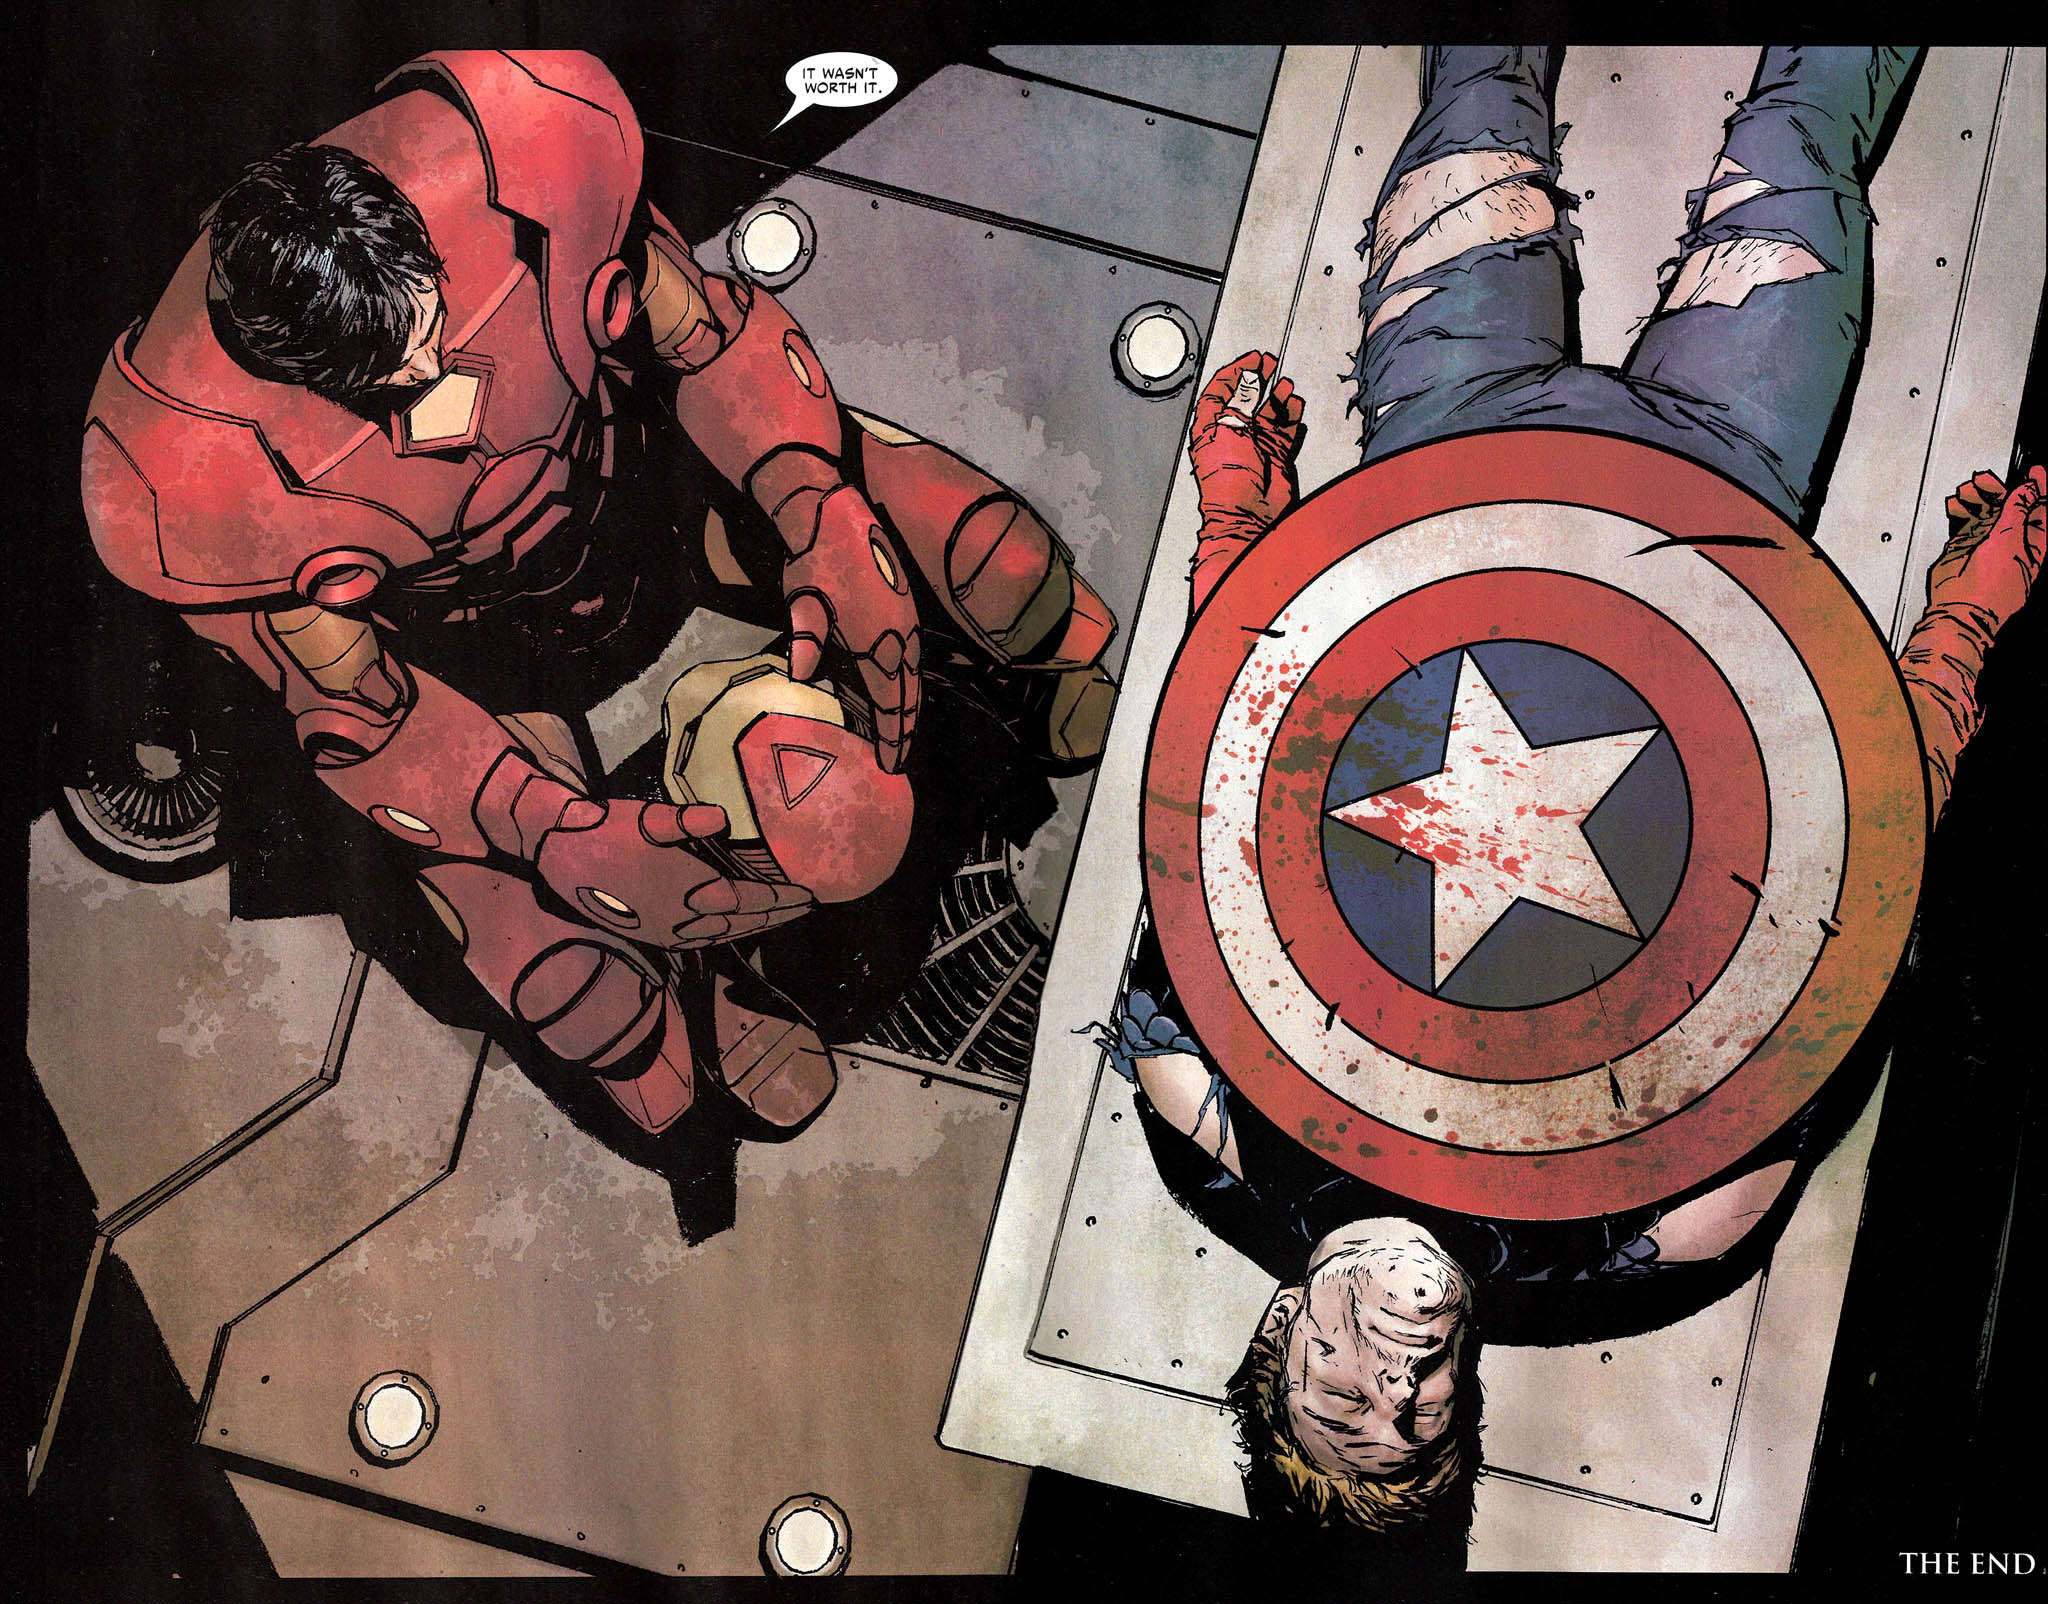 Tony has his final words with Steve in Civil War: The Confession Vol. 1 #1 "The Confession" (2007), Marvel Comics. Words by Brian Michael Bendis, art by Alex Maleev, José Villarrubia, and Chris Eliopoulos.